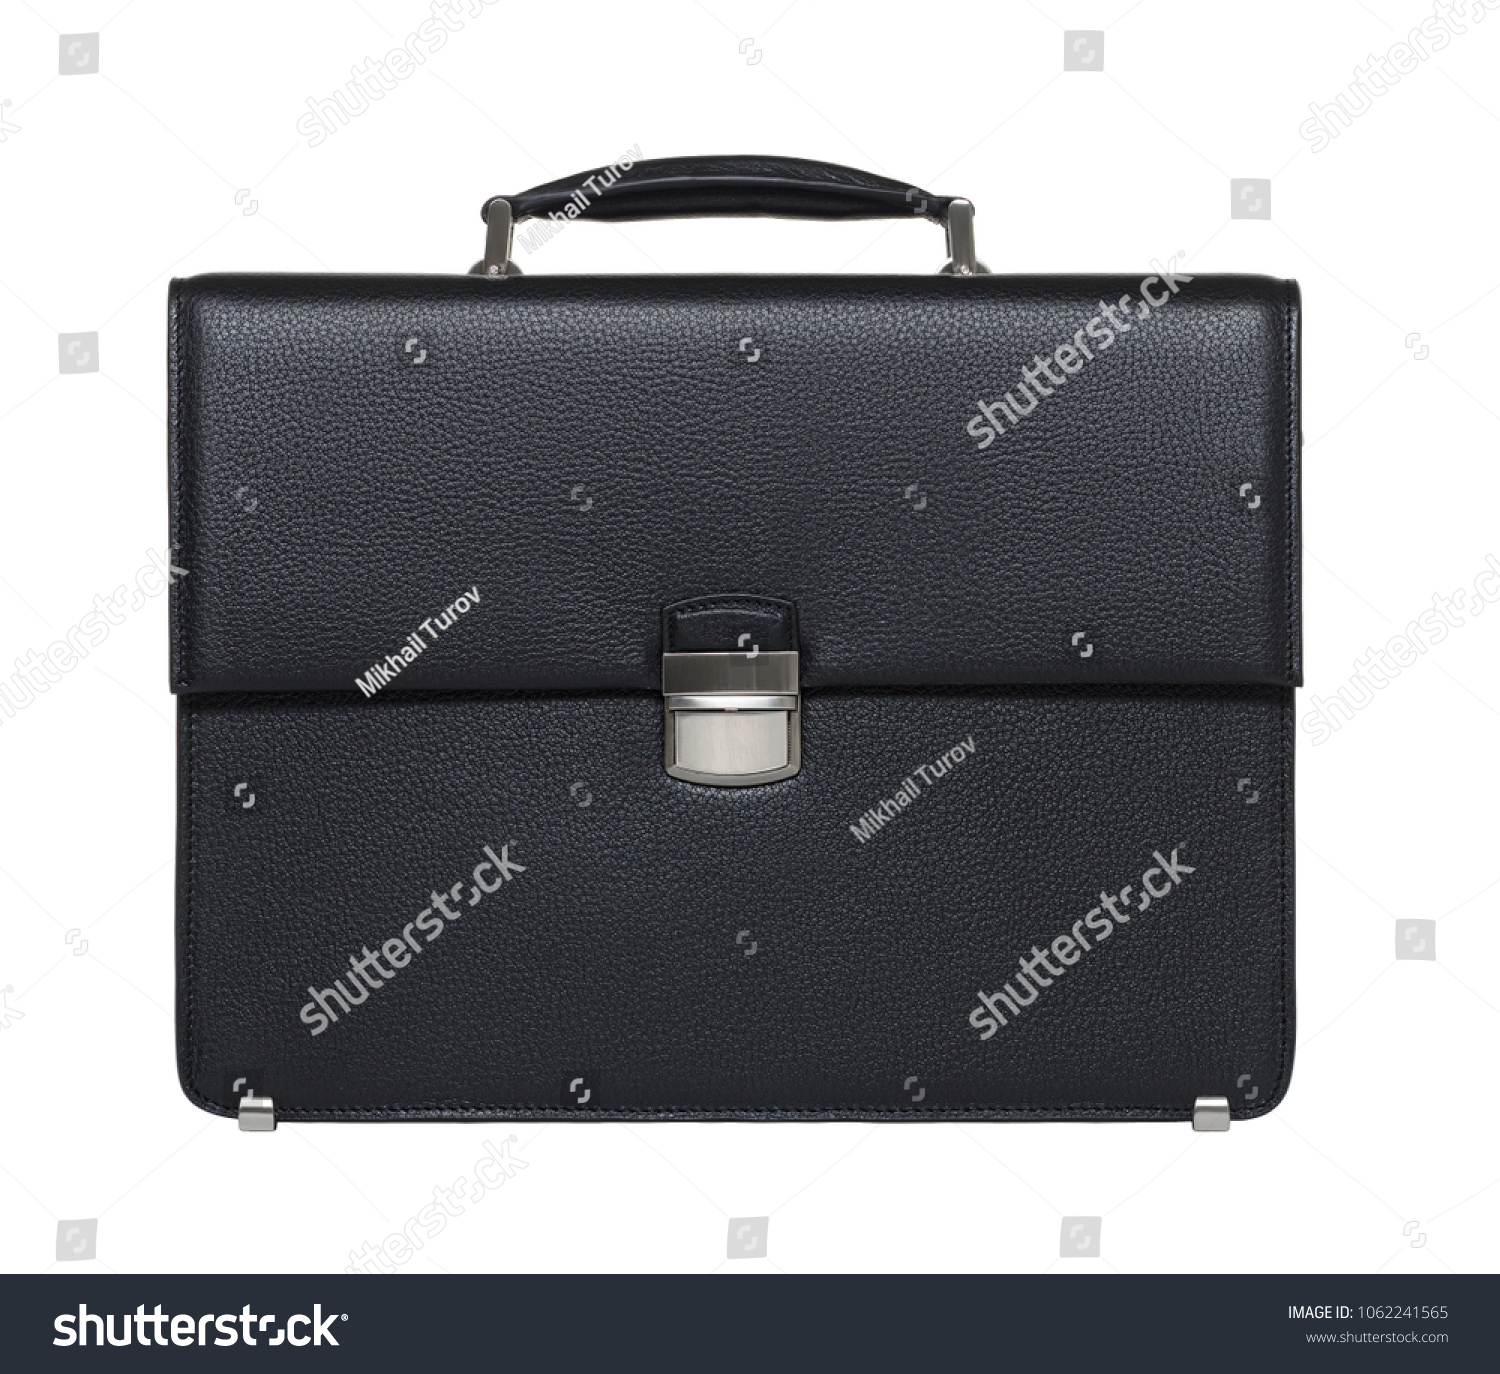 Fashion men's leather bag, briefcase, diplomat, for office, for laptop, isolated on white background, clipping path, for design, mock up, black #1062241565